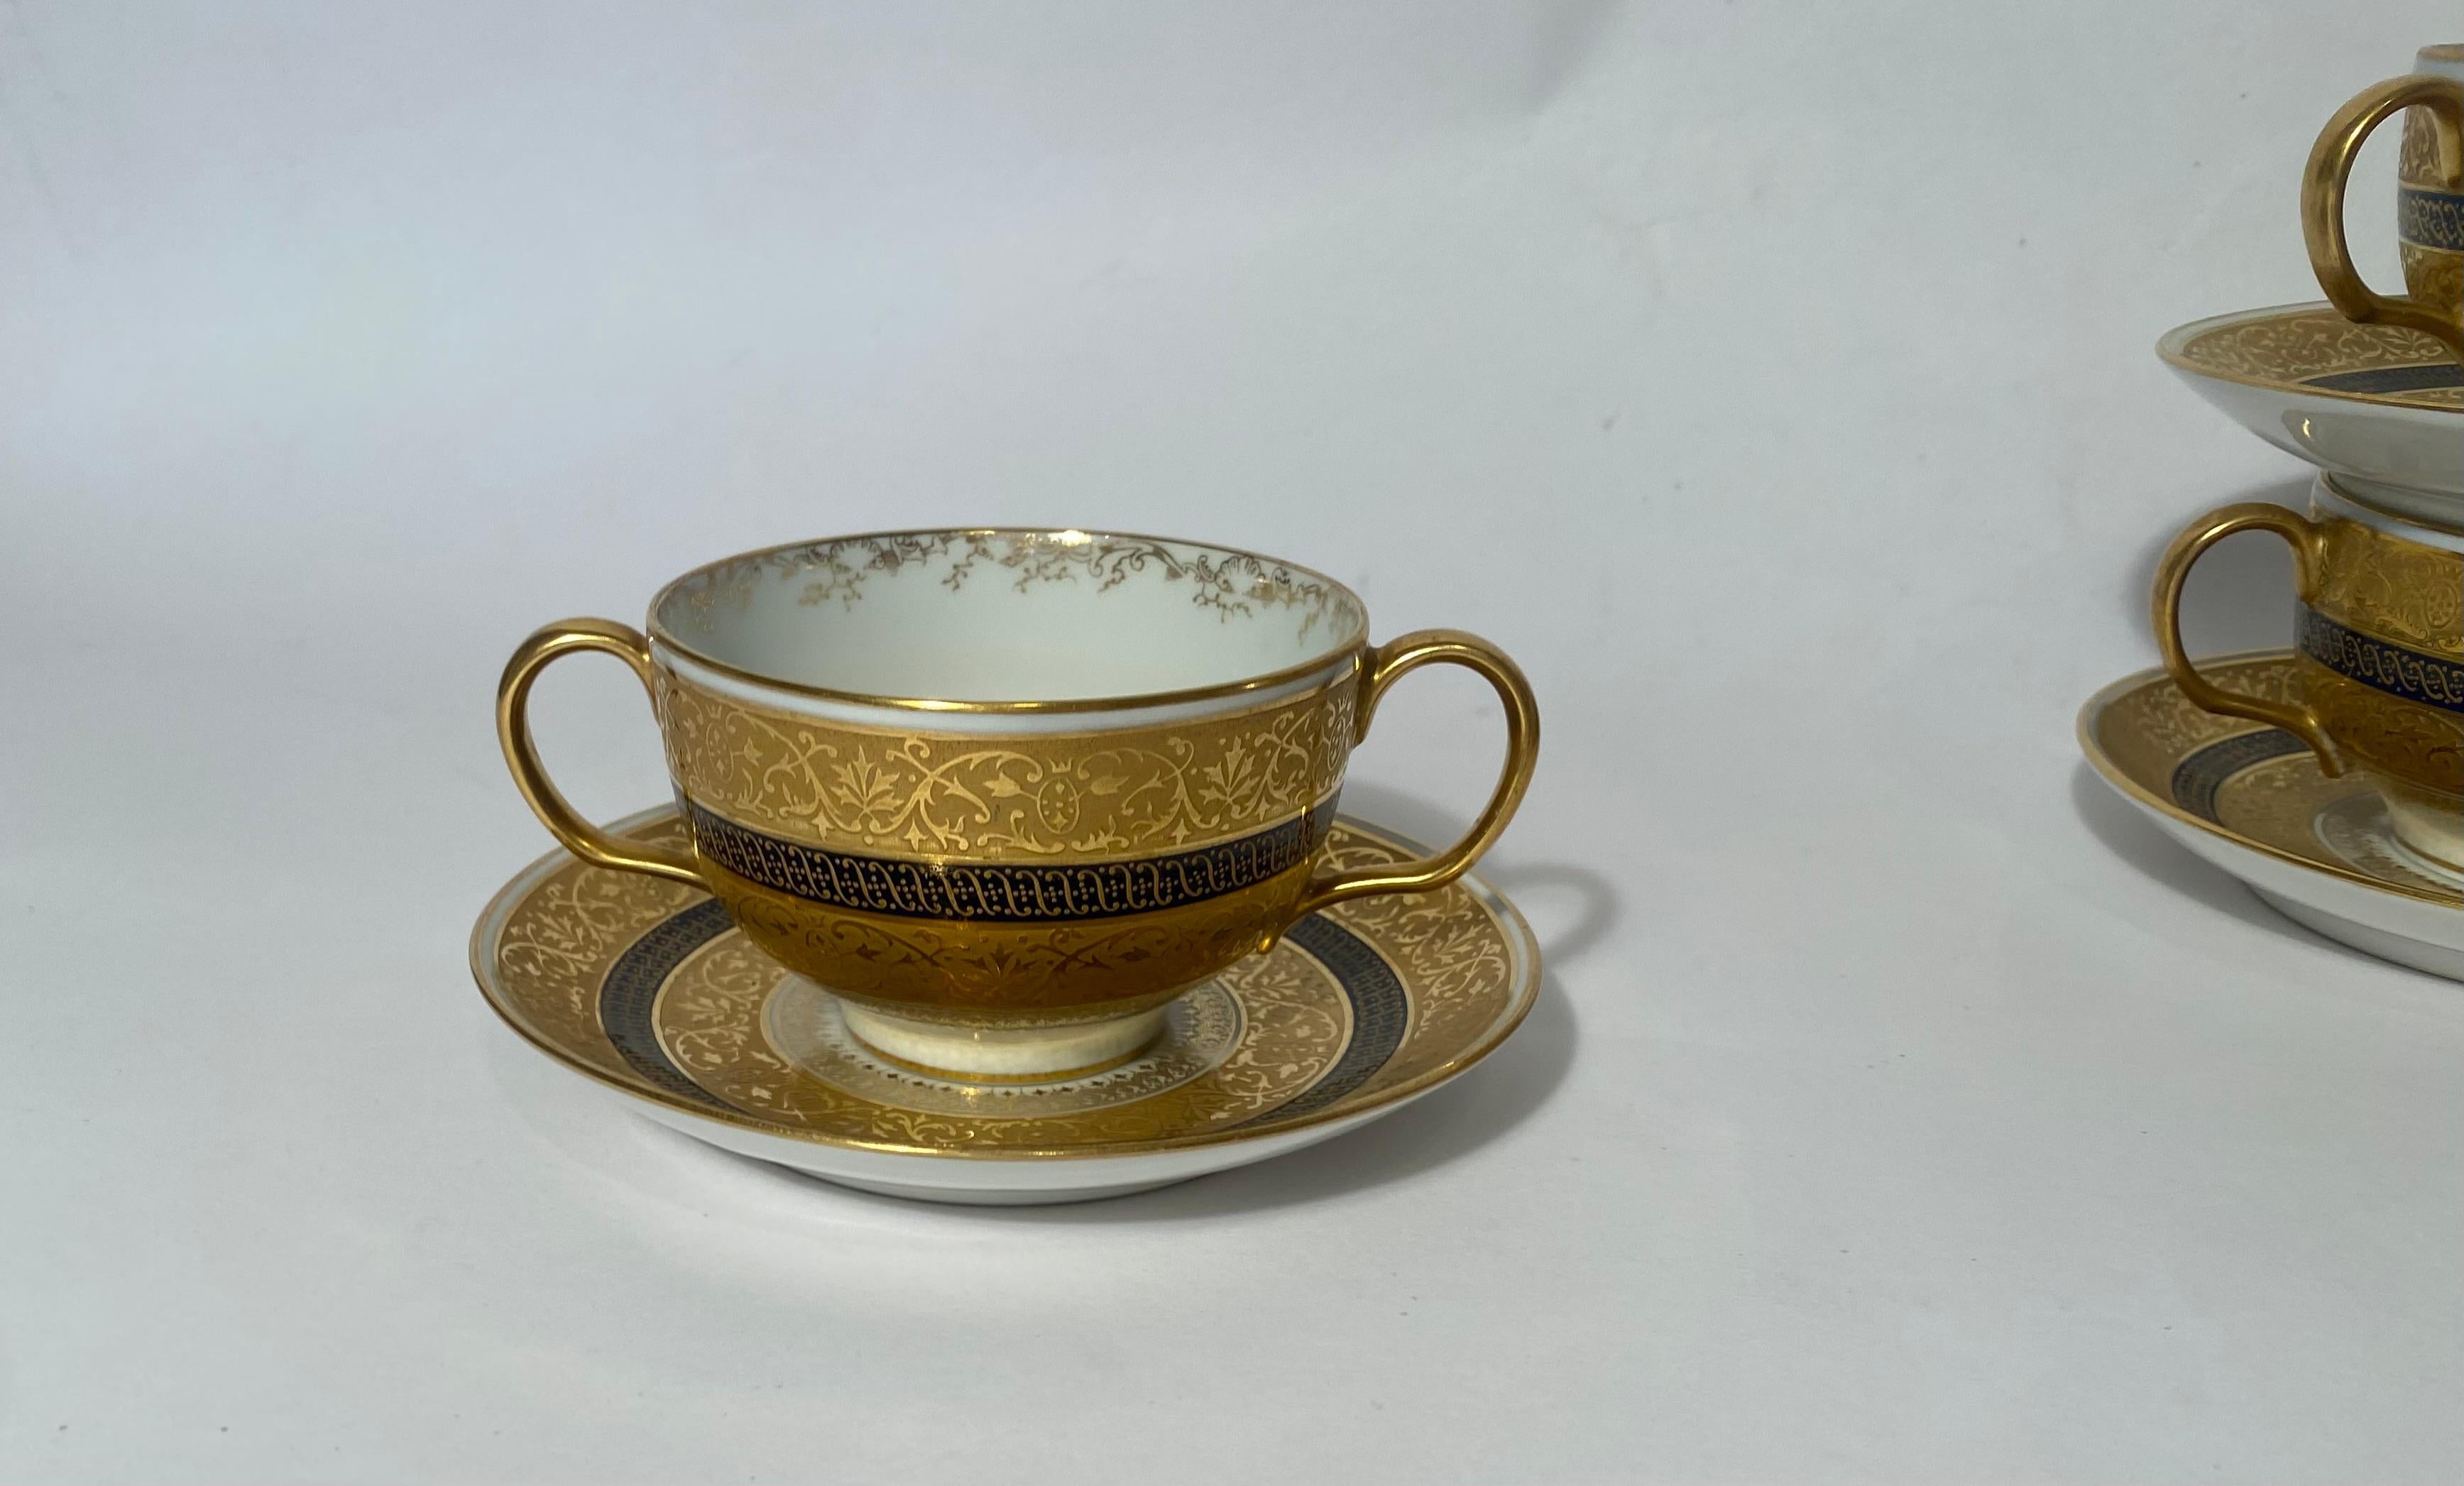 Hand-Crafted A Set of 8 Cream Soup or Dessert Cups & Saucers. Antique Limoges Circa 1890 